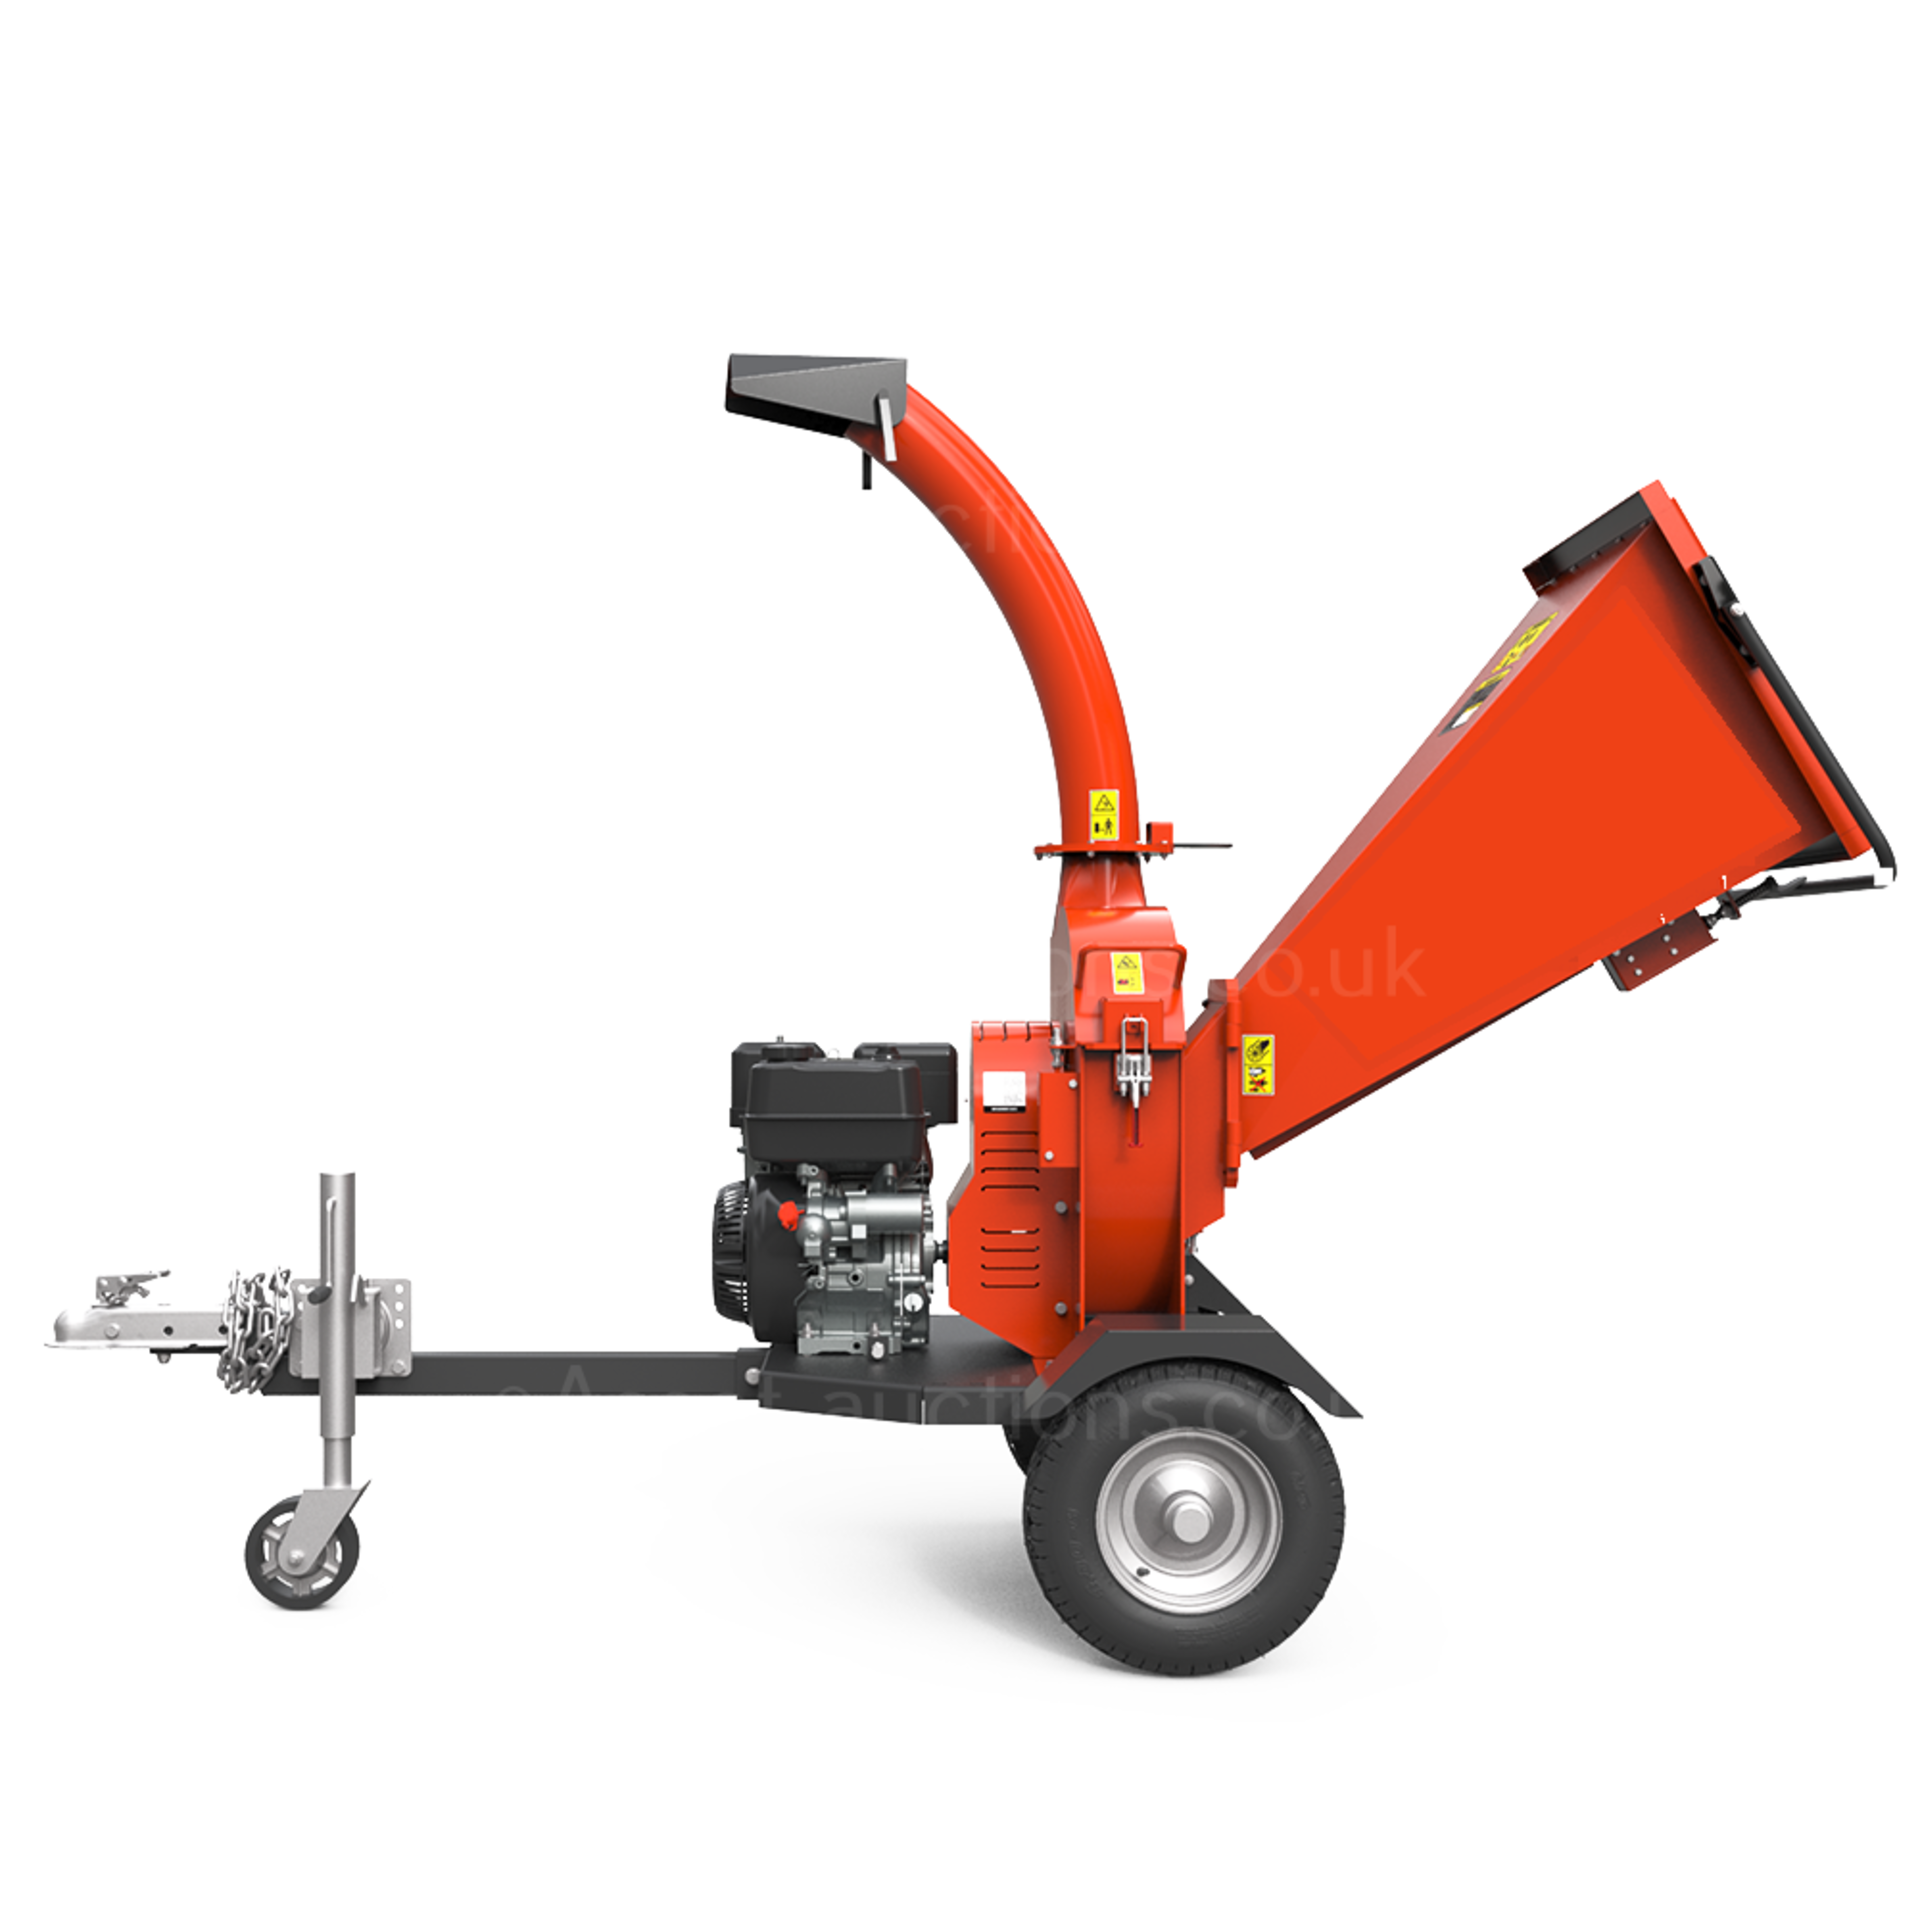 BRAND NEW AND UNUSED DGS1500 420CC 4.5” TOWABLE PETROL WOOD CHIPPER *NO VAT* - Image 8 of 11